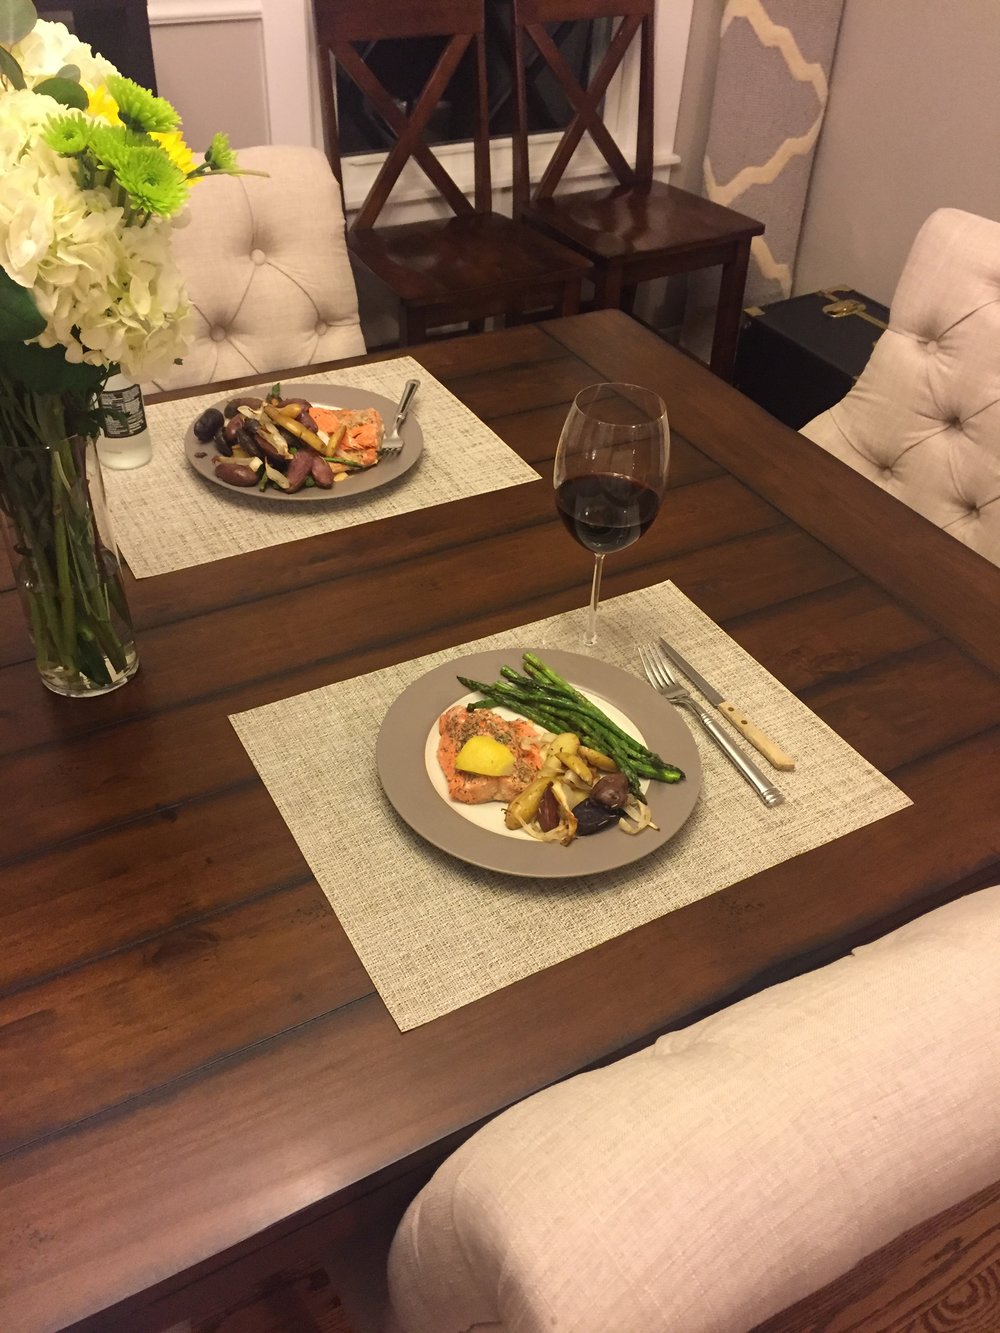 Our first dinner on a REAL table